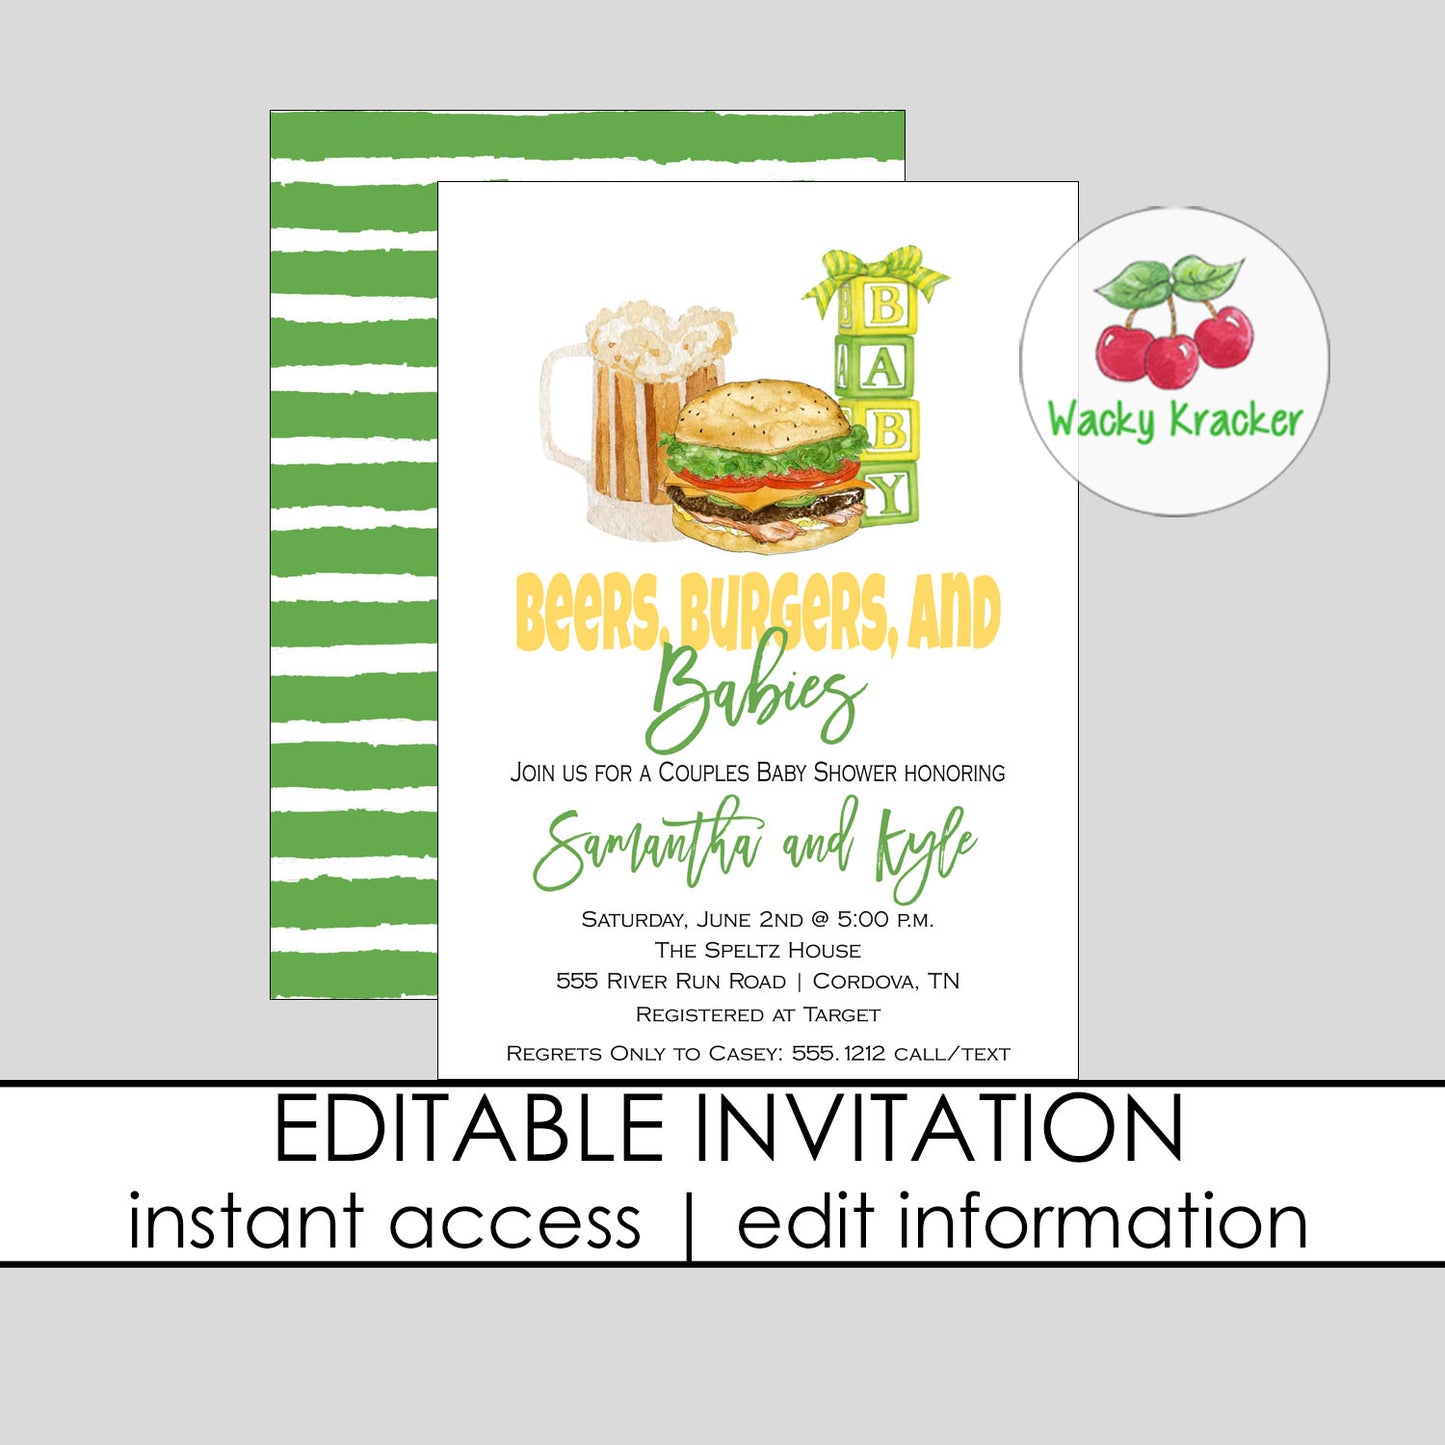 Beers, Burgers, and Babies Shower Invitation